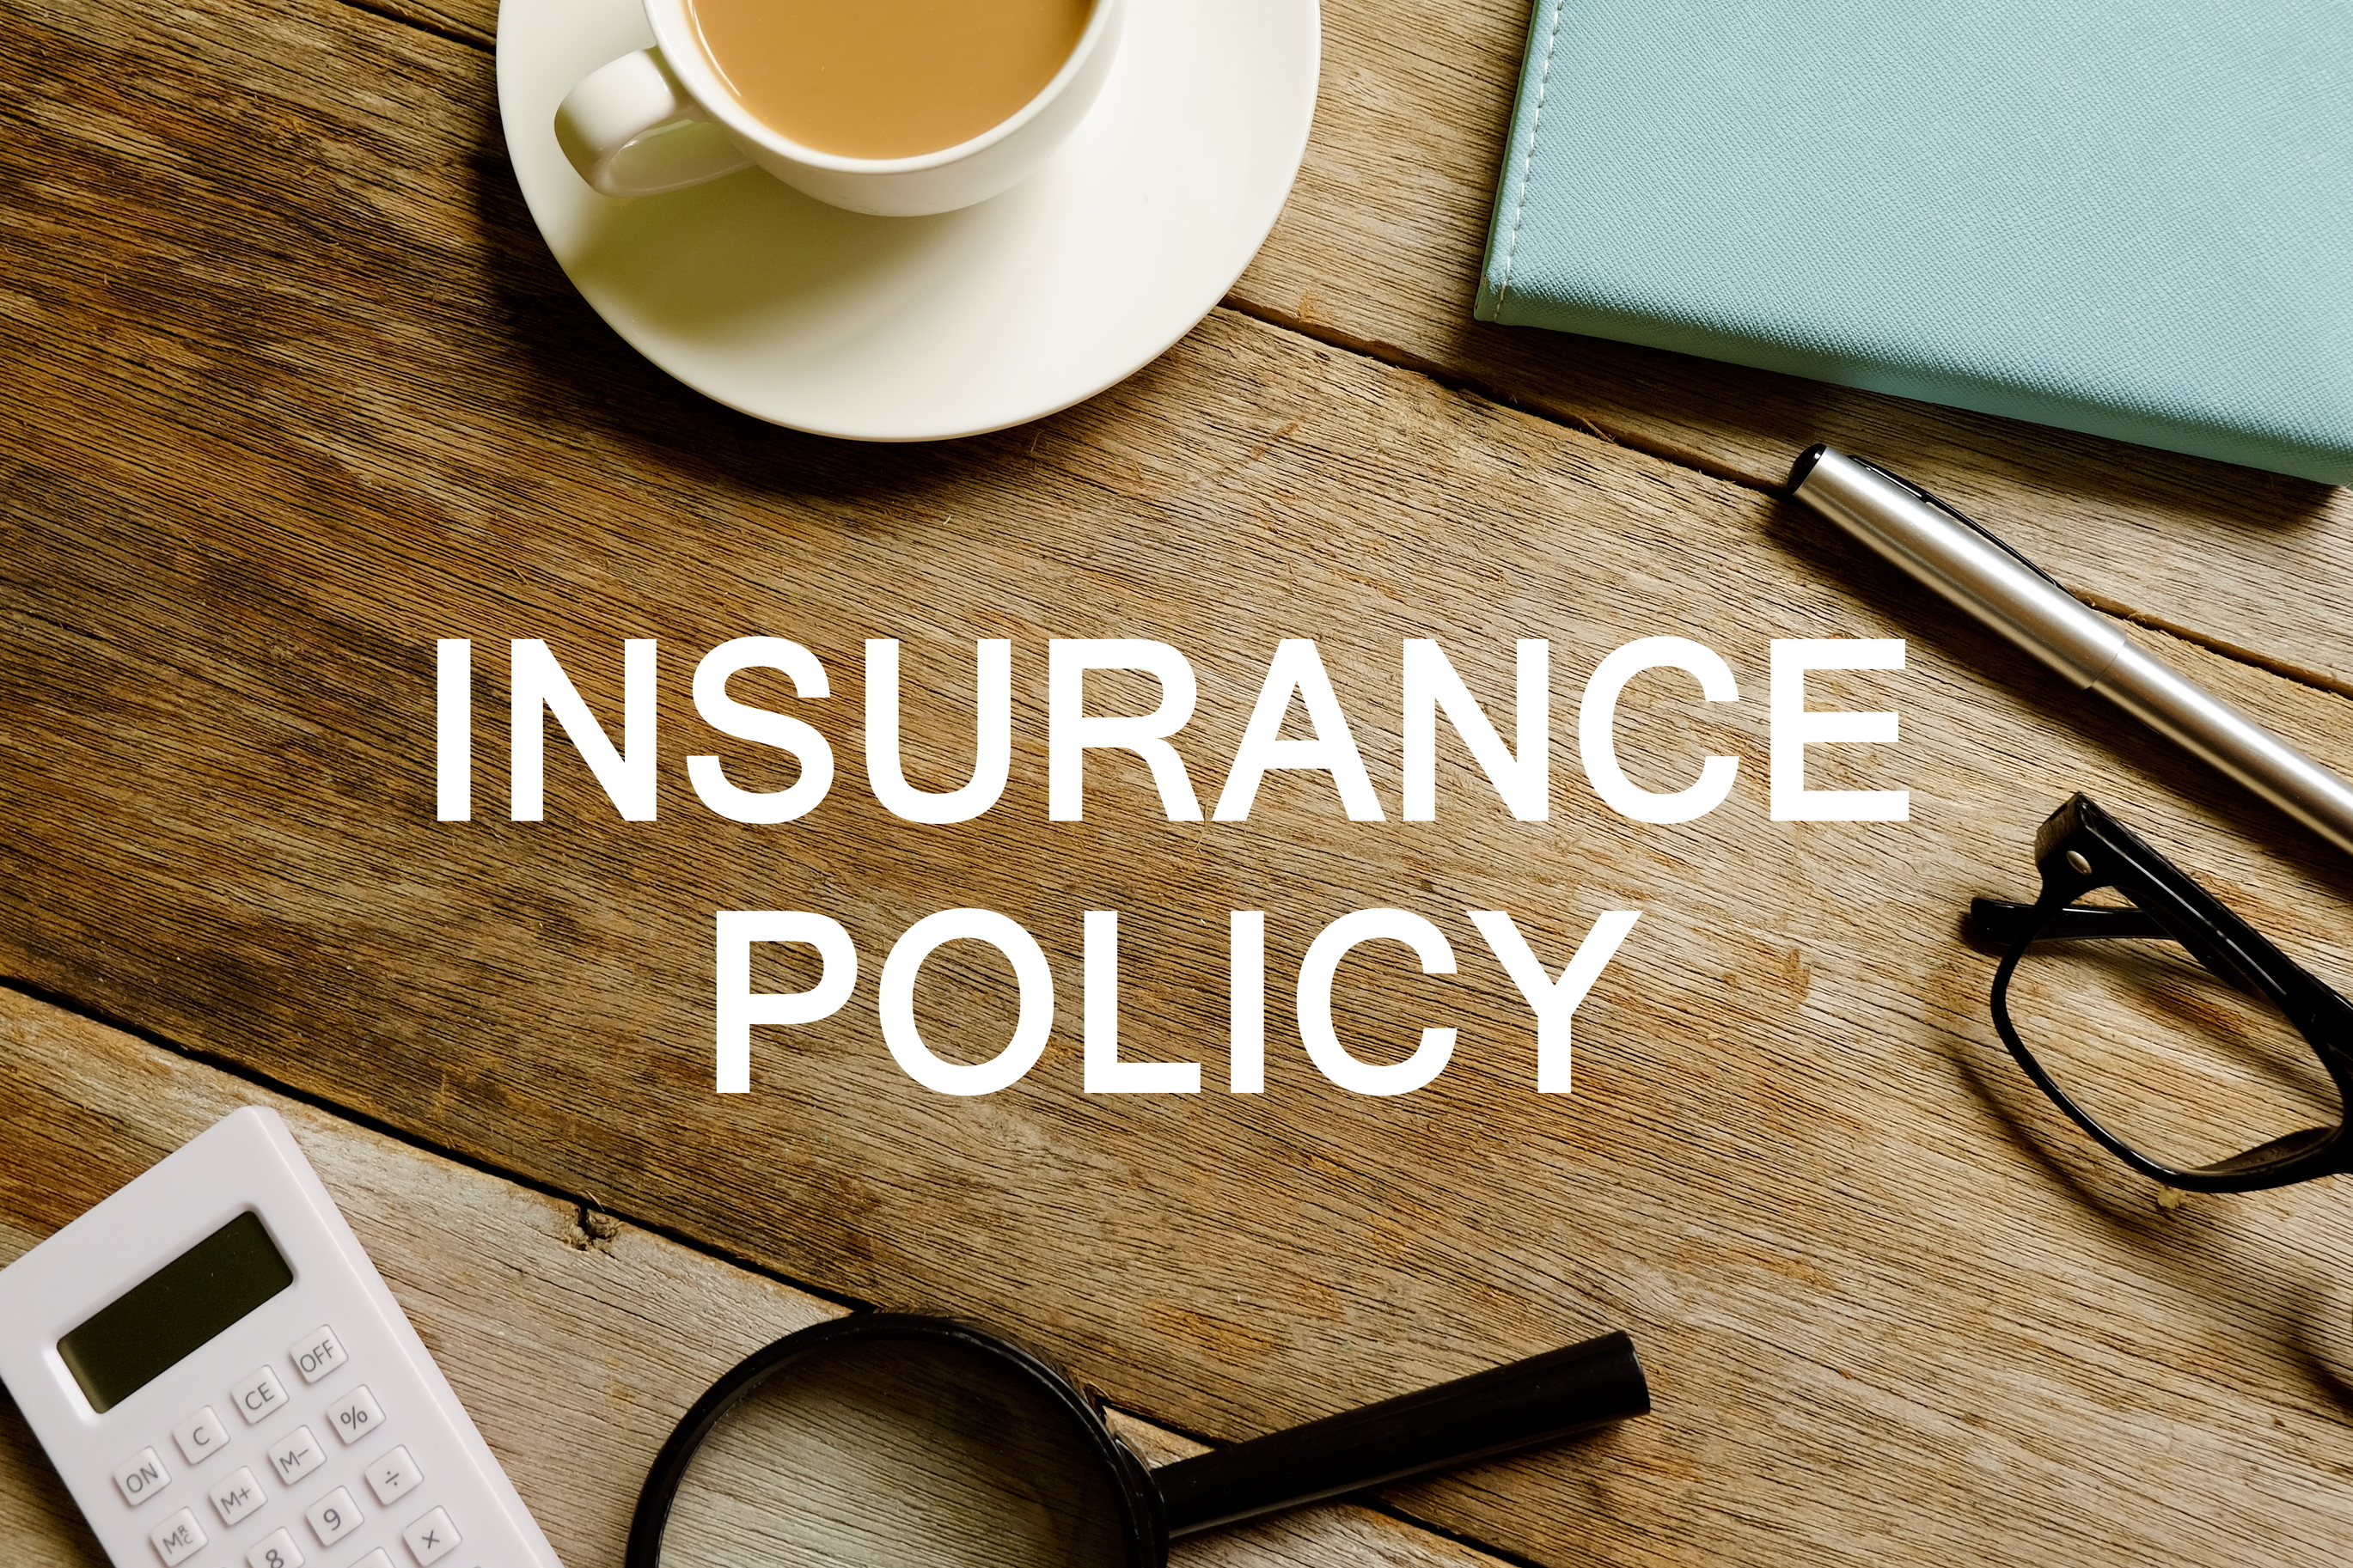 5 Reasons to Keep Your Insurance Policy Documents Updated